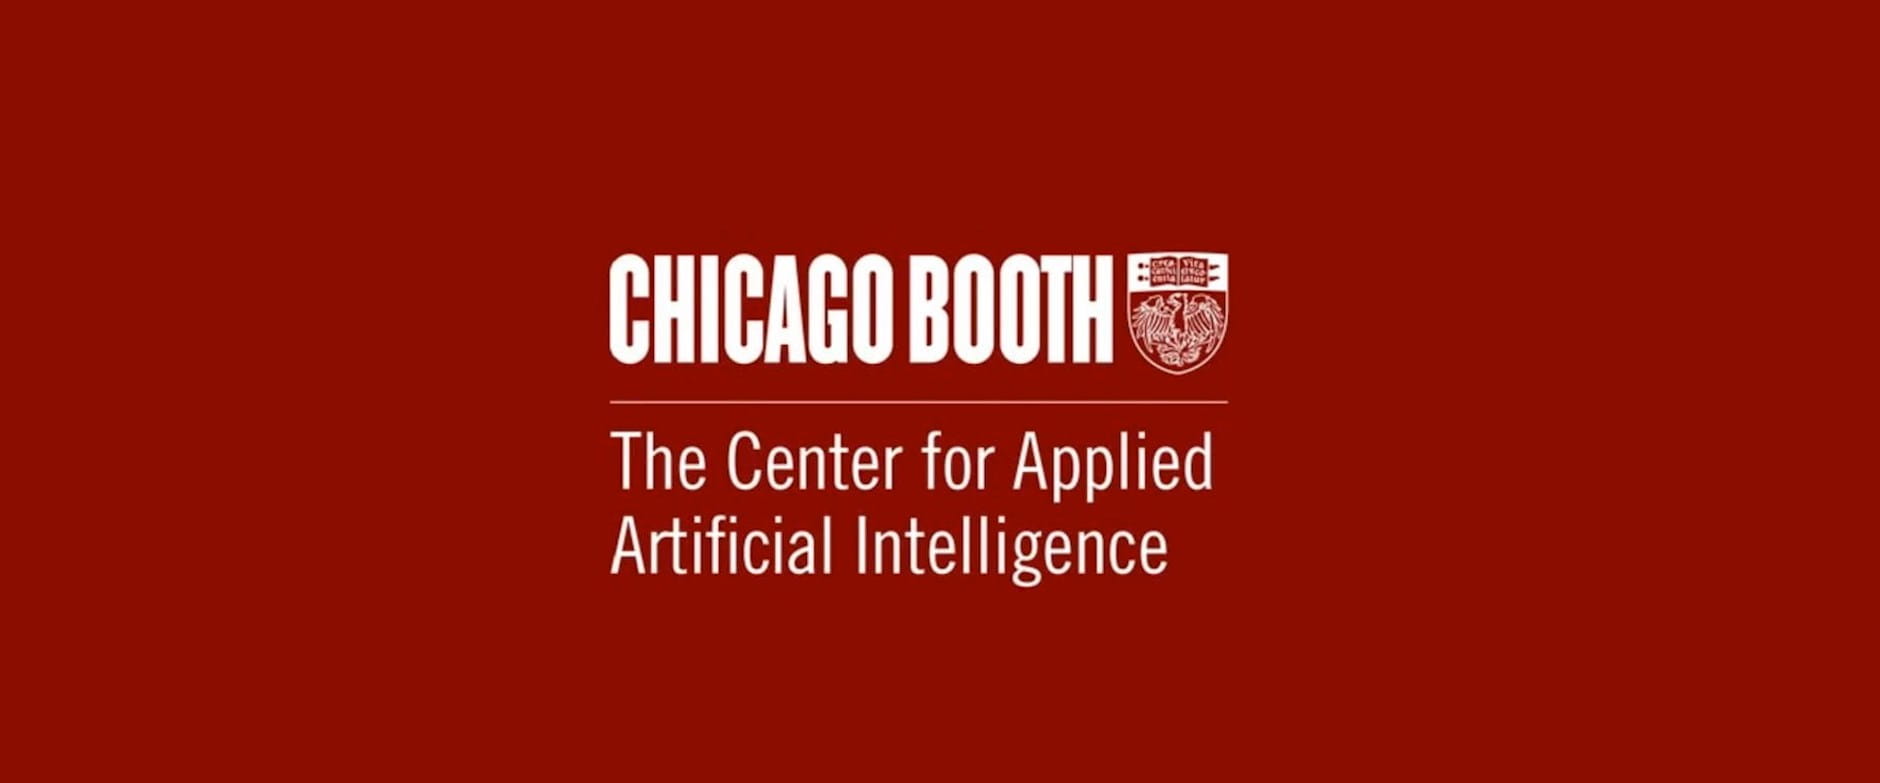 The Center for Applied Artifical Intelligence